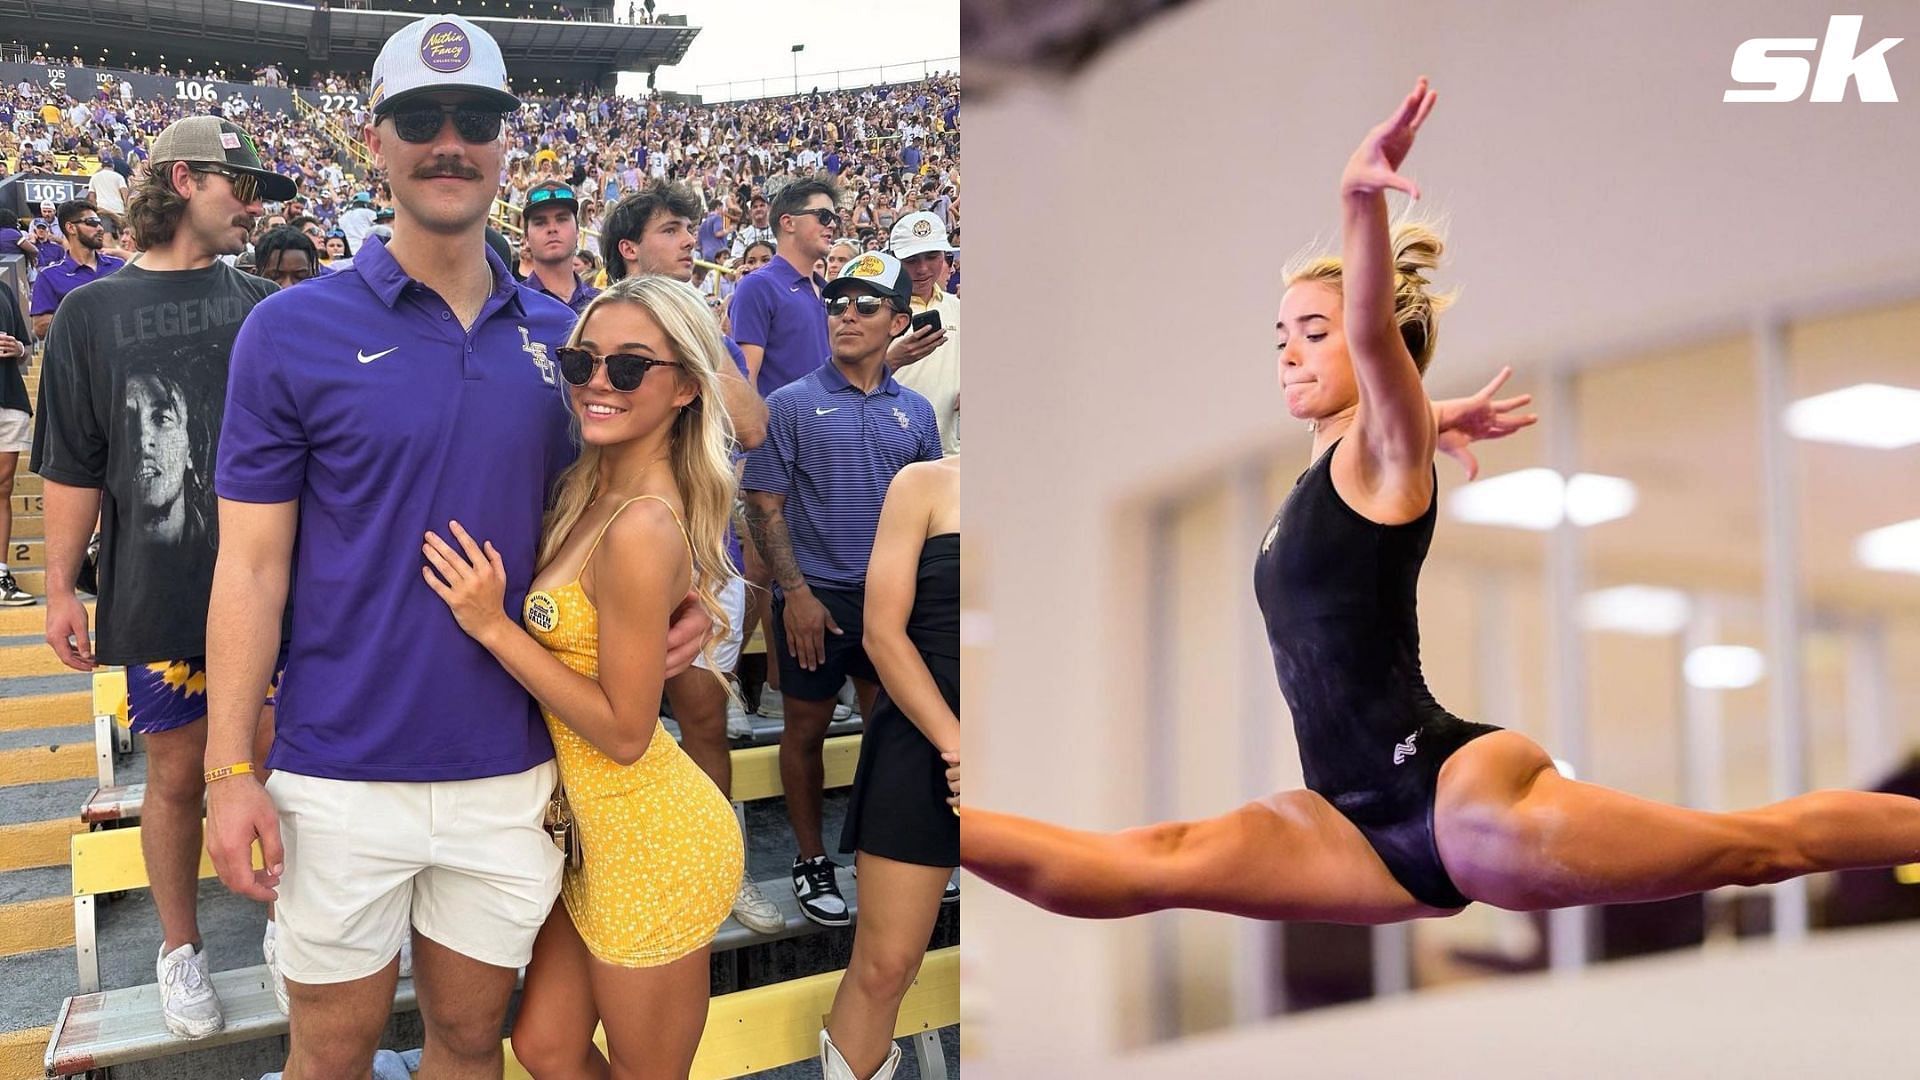 LSU gymnast Olivia Dunne reveals why she maintained a low-key relationship with Paul Skenes: &quot;Keeping certain things private is okay&quot;